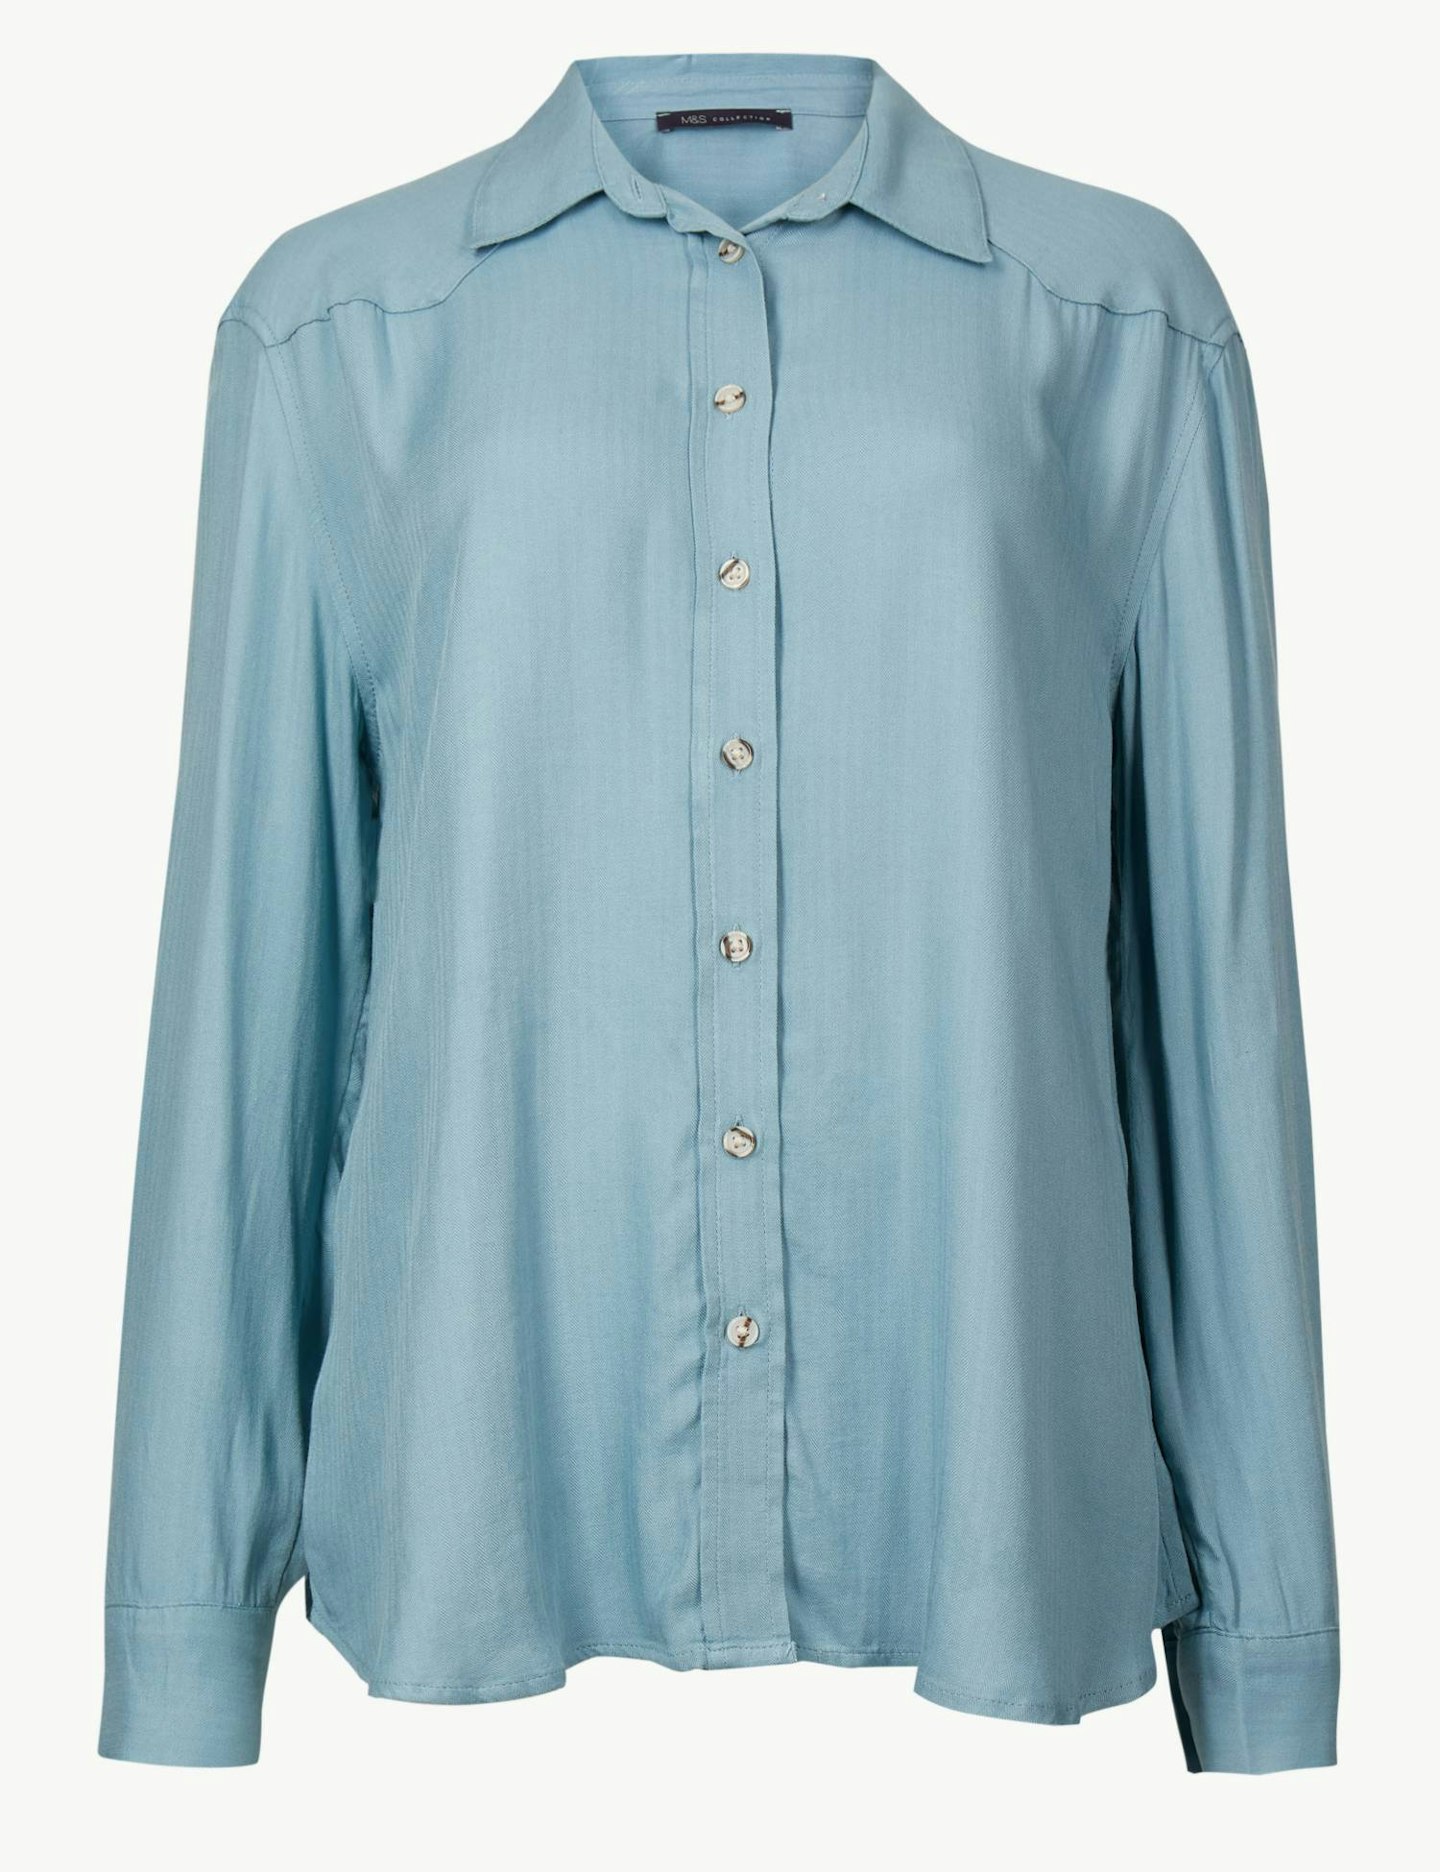 M&S Collection, Long Sleeve Shirt, £19.50